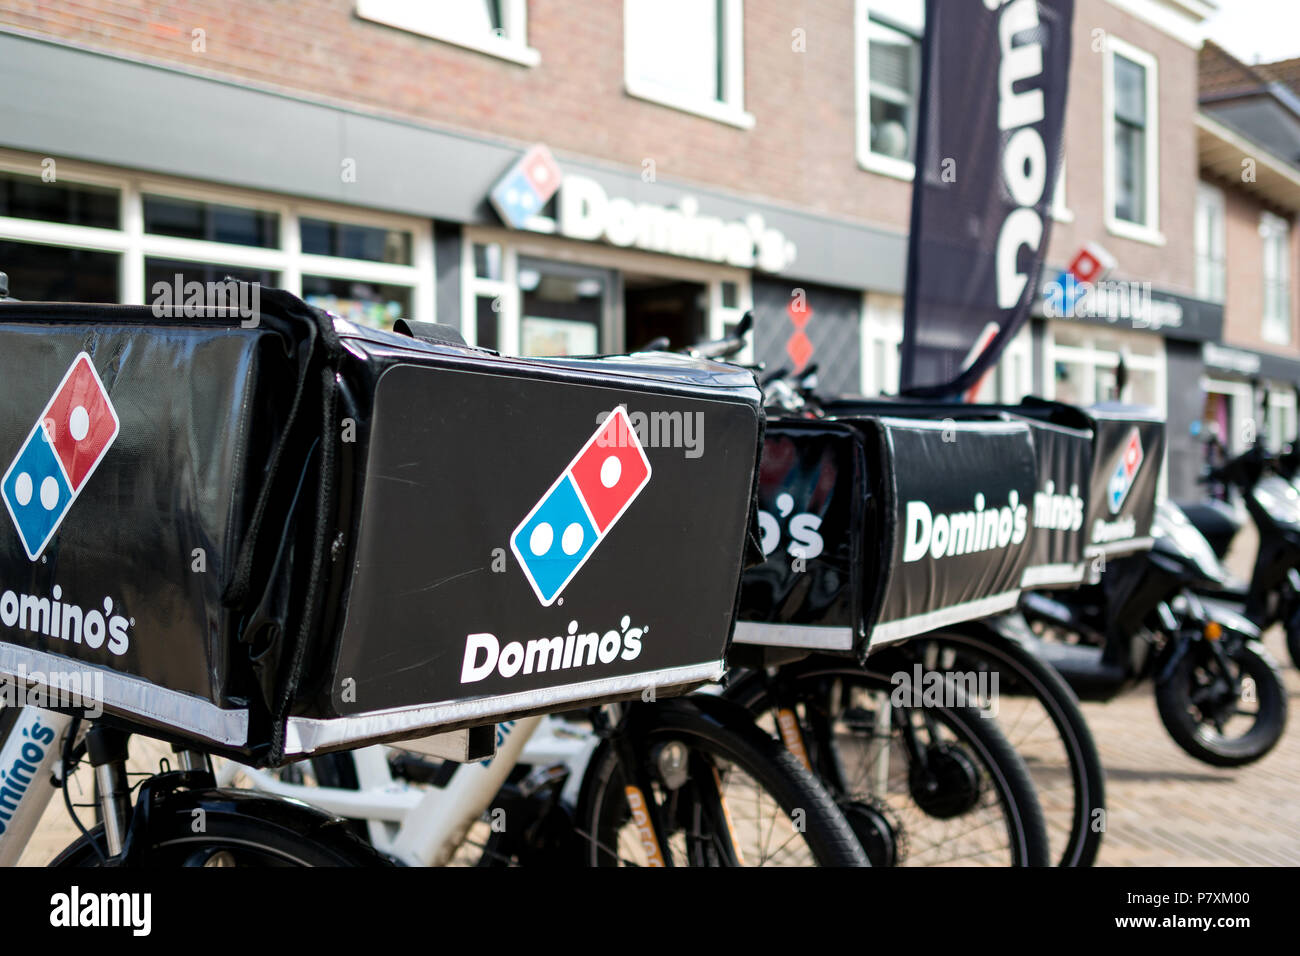 Delivery bikes of Domino's restaurant. Domino's is an American pizza restaurant chain founded in 1960. Stock Photo